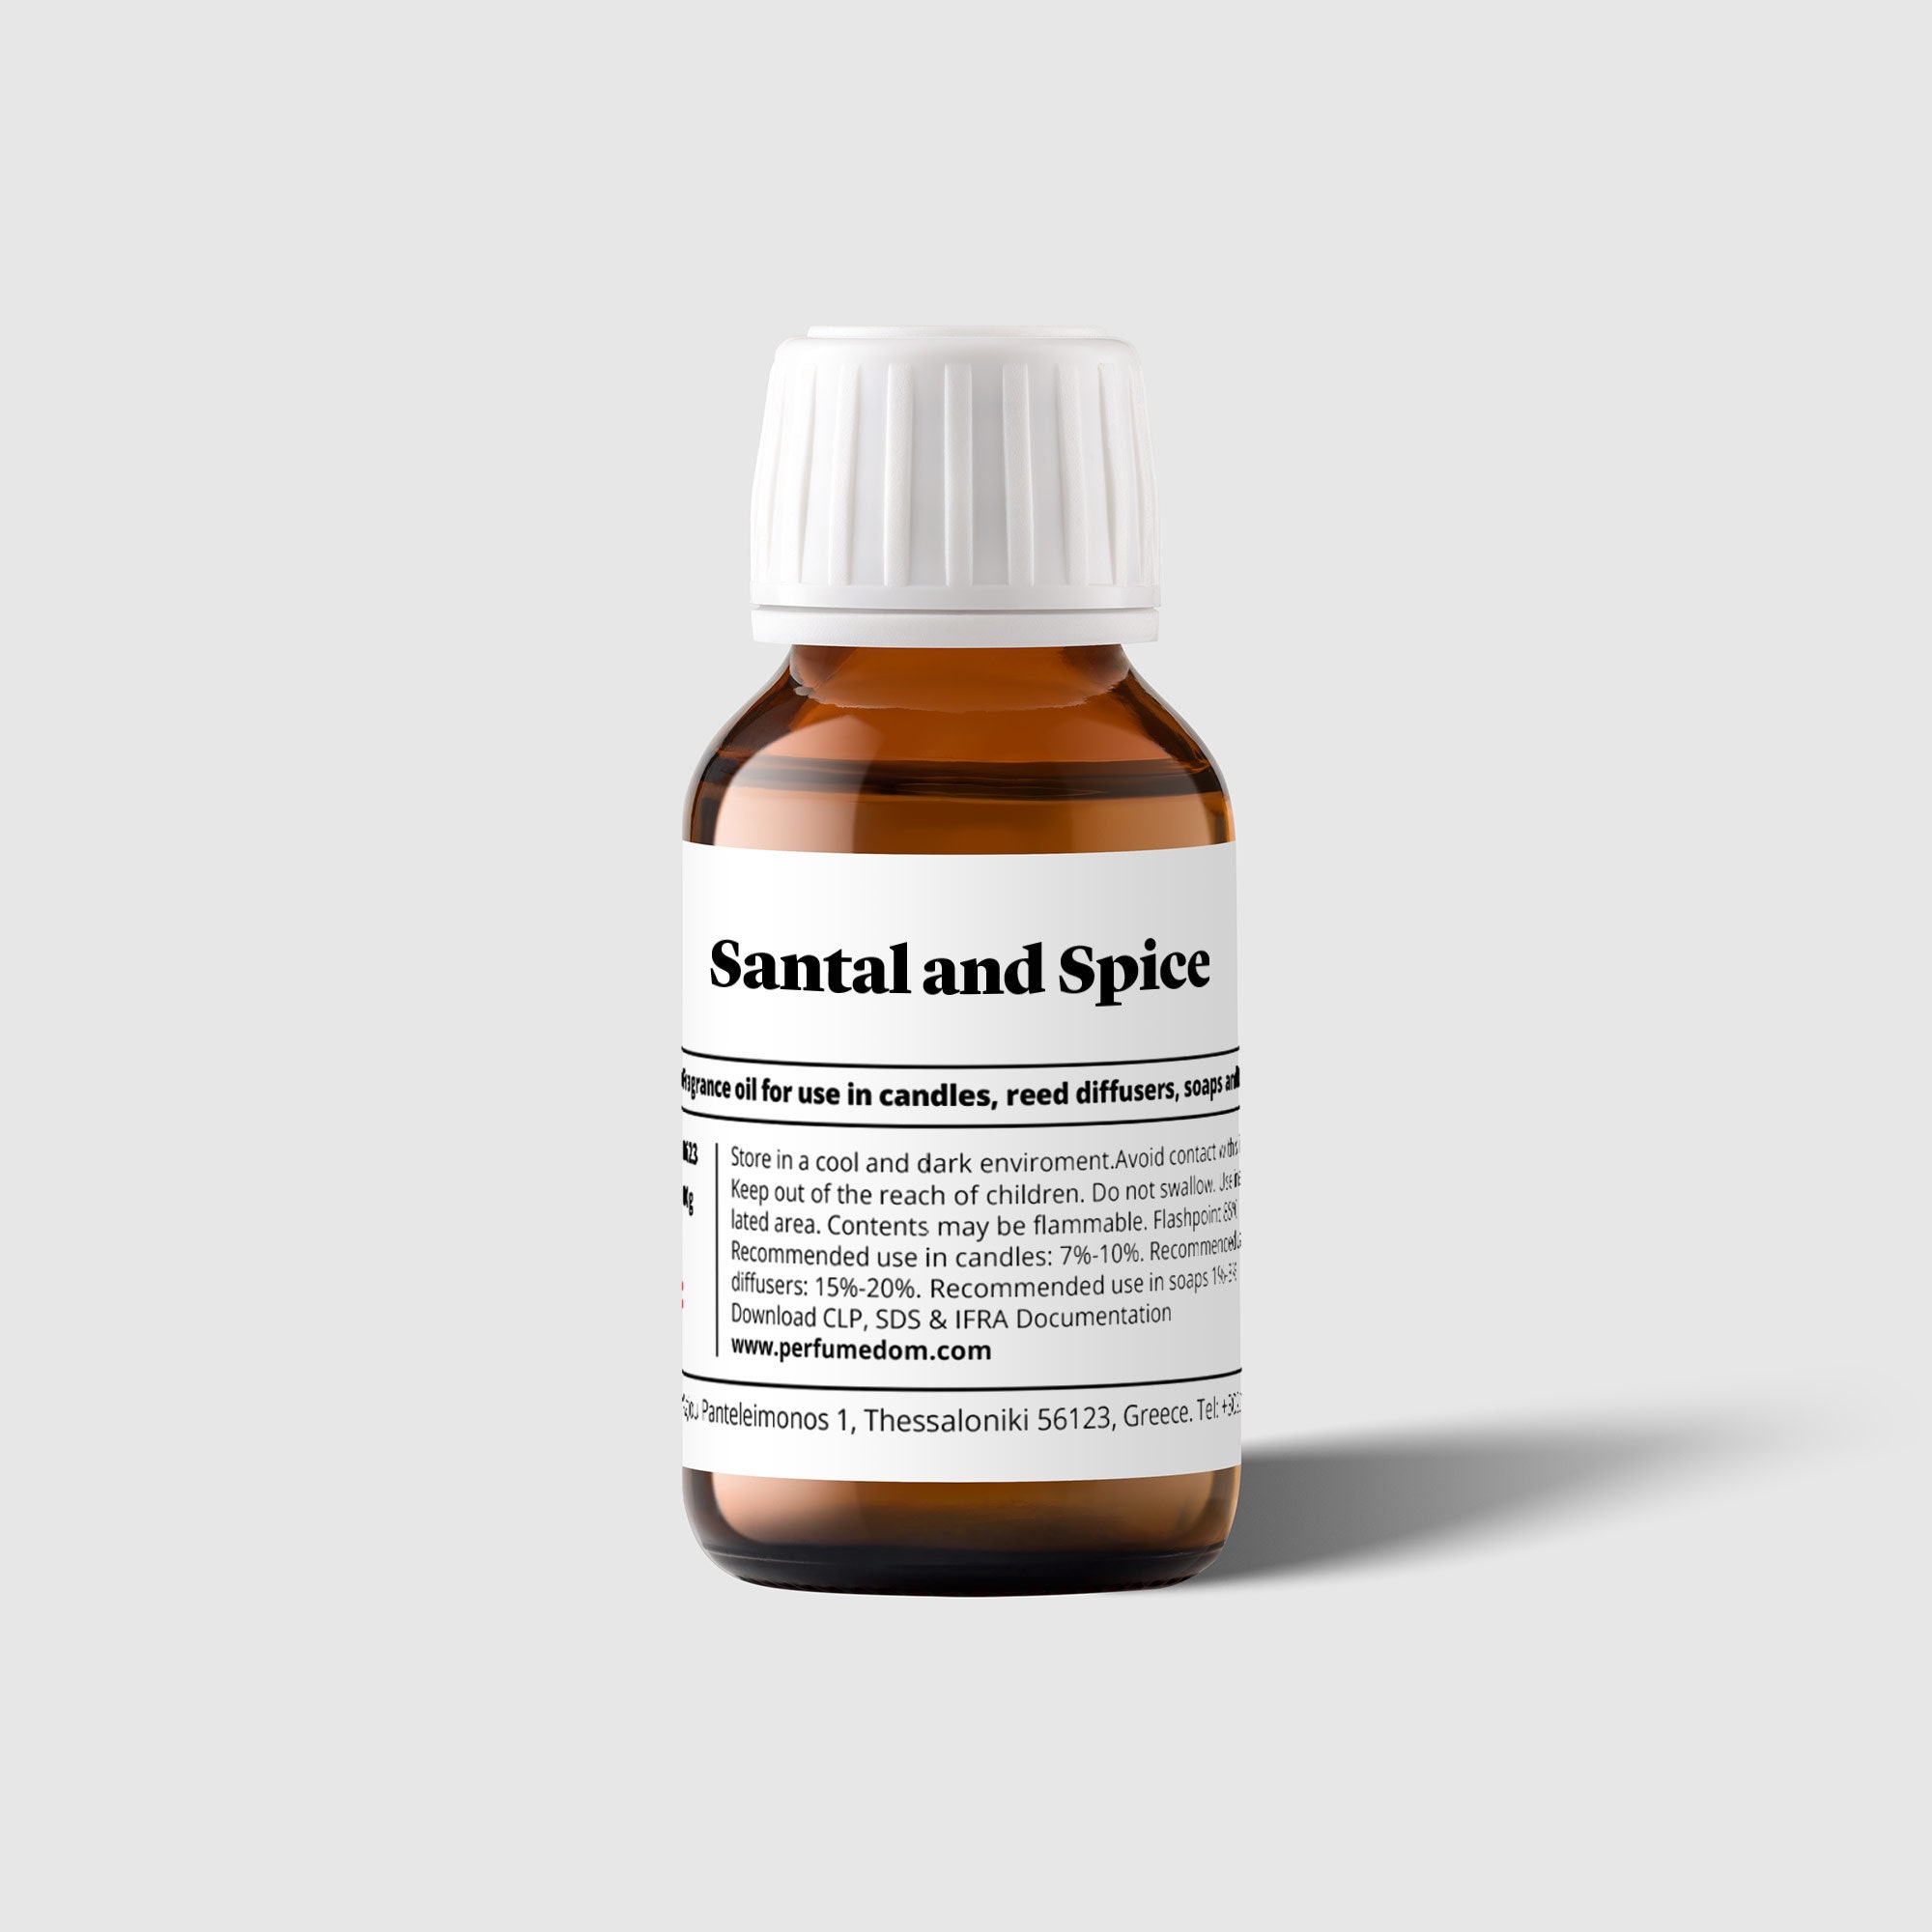  Santal Fragrance Oil - Air-Scent Aroma and Essential Oil Blend  - 10 Milliliter (.34 fl oz) Aromatherapy Diffuser Oil Bottle for Aroma  Diffusers - Cardamom, Sandalwood, Papyrus and Musk : Health & Household